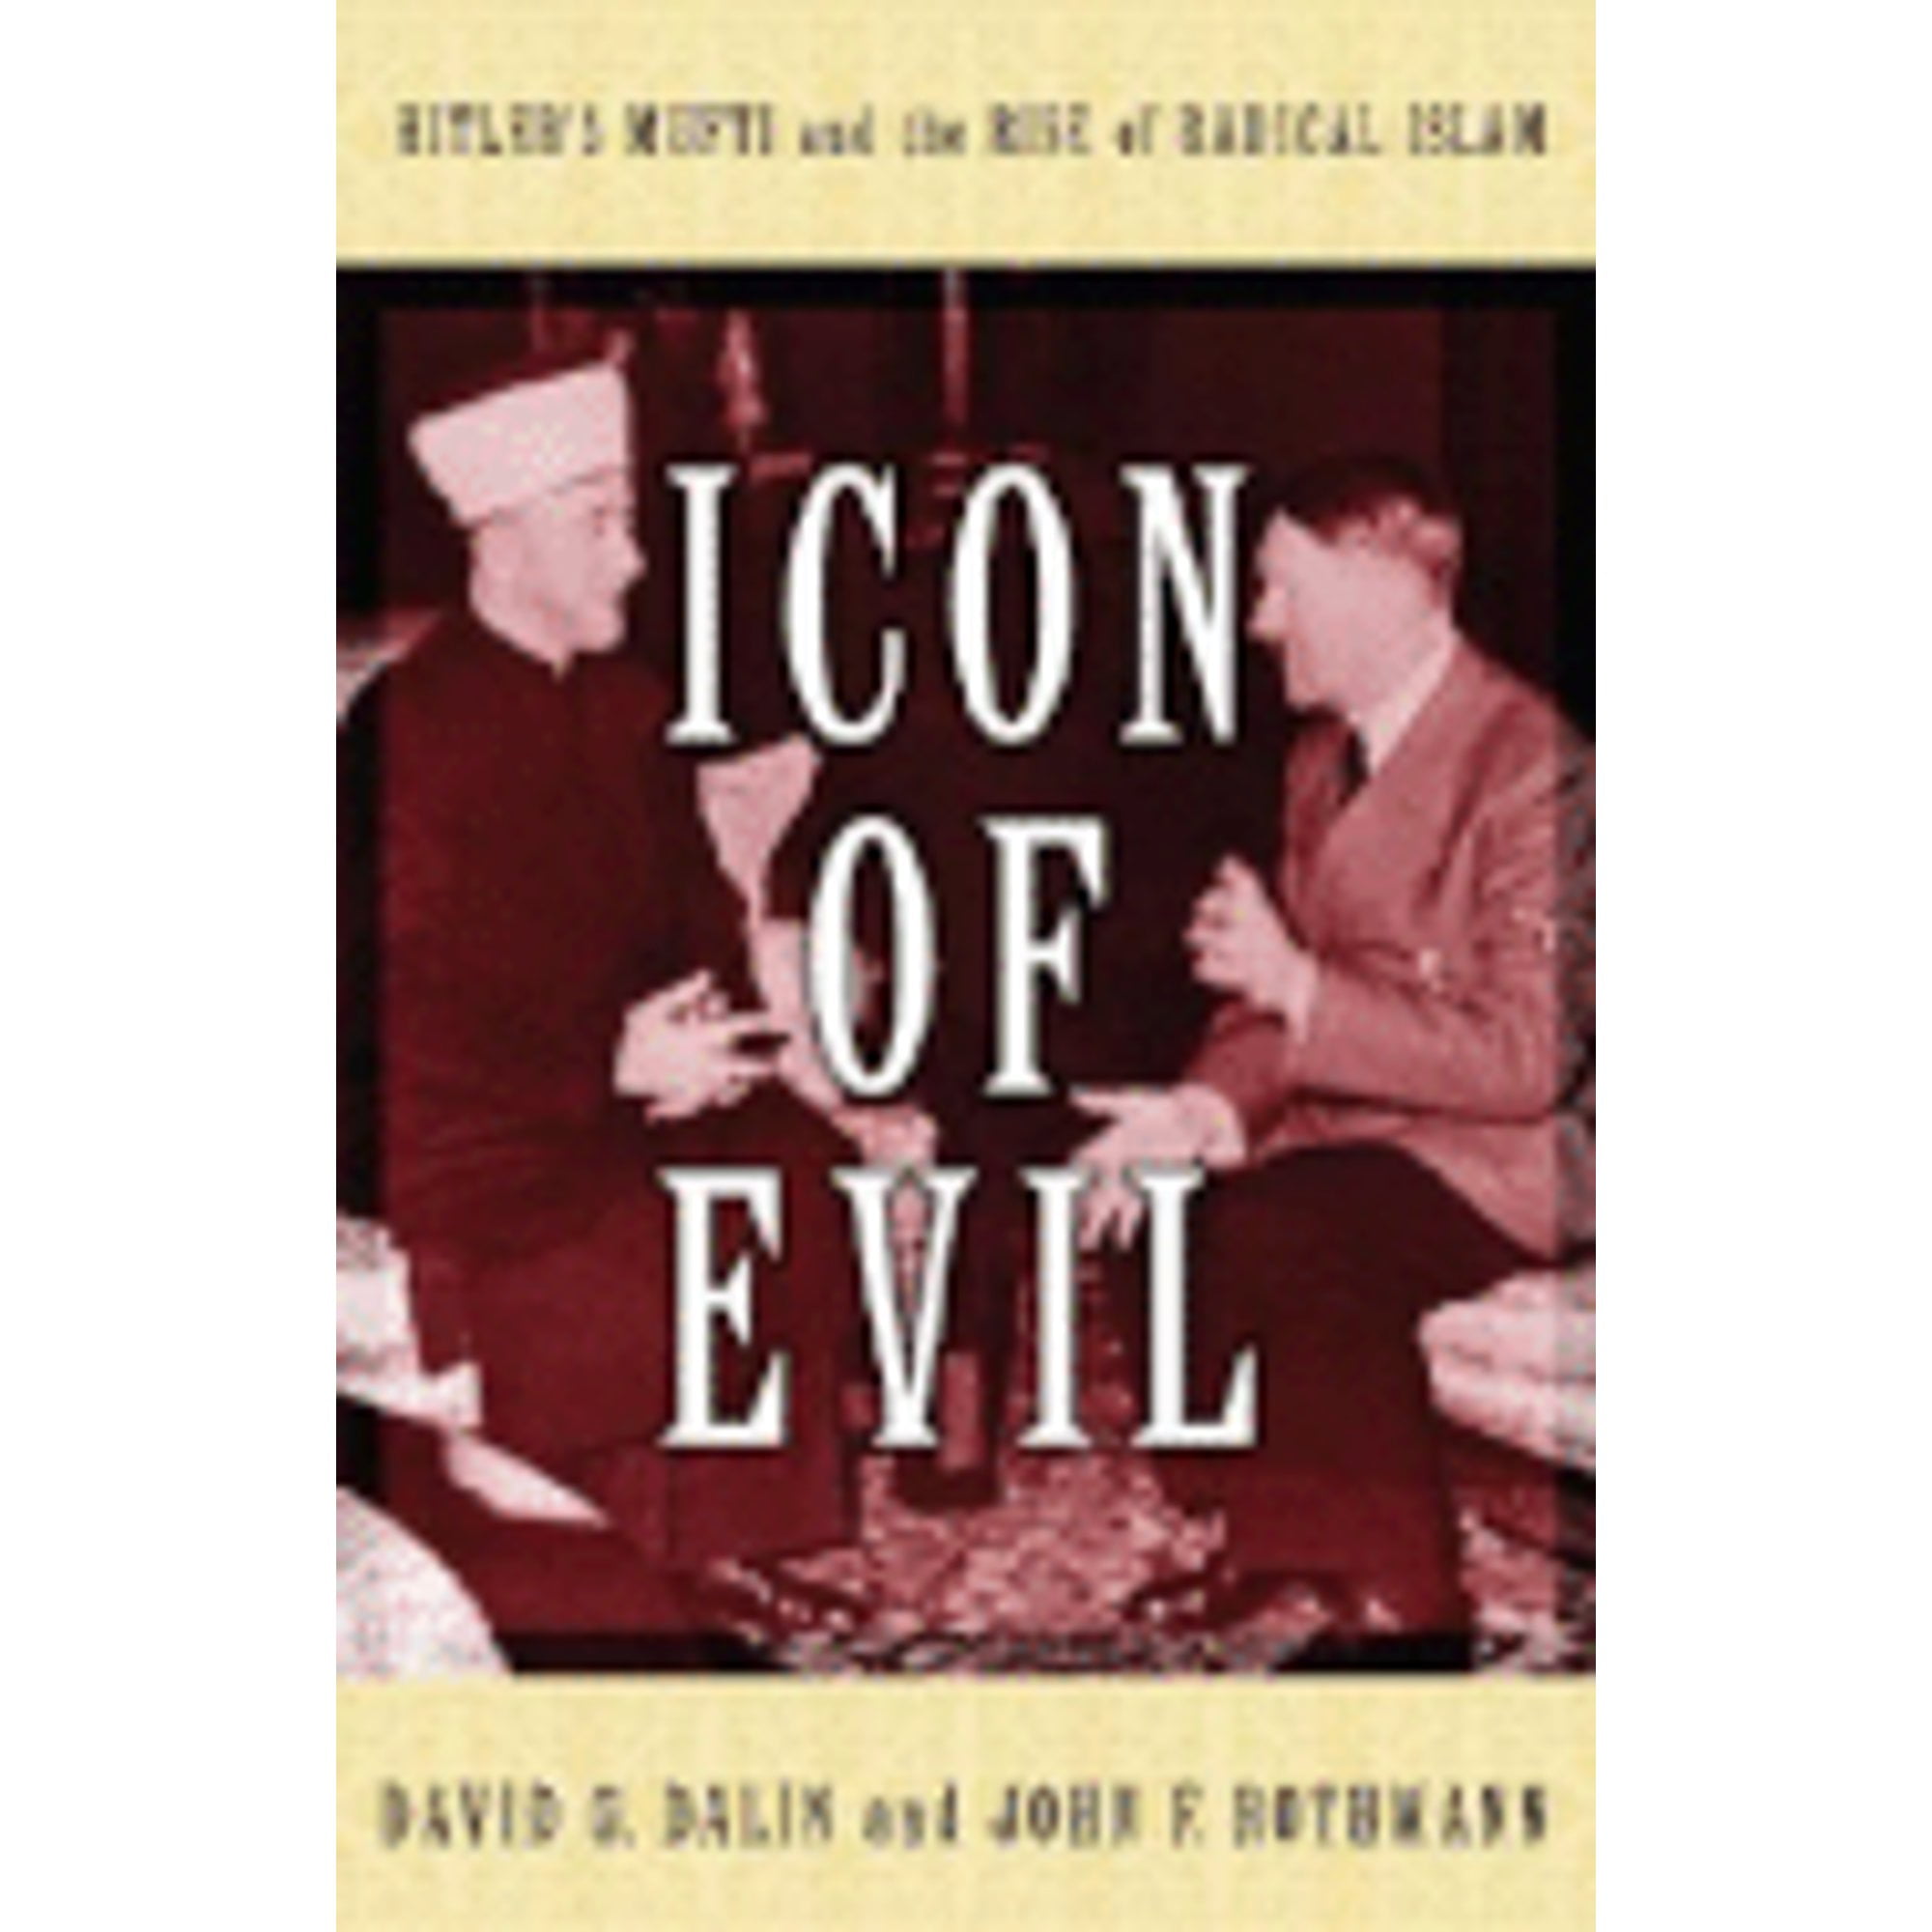 Pre-Owned Icon of Evil: Hitlers Mufti and the Rise Radical Islam Hardcover David G. Dalin, John F. Rothmann